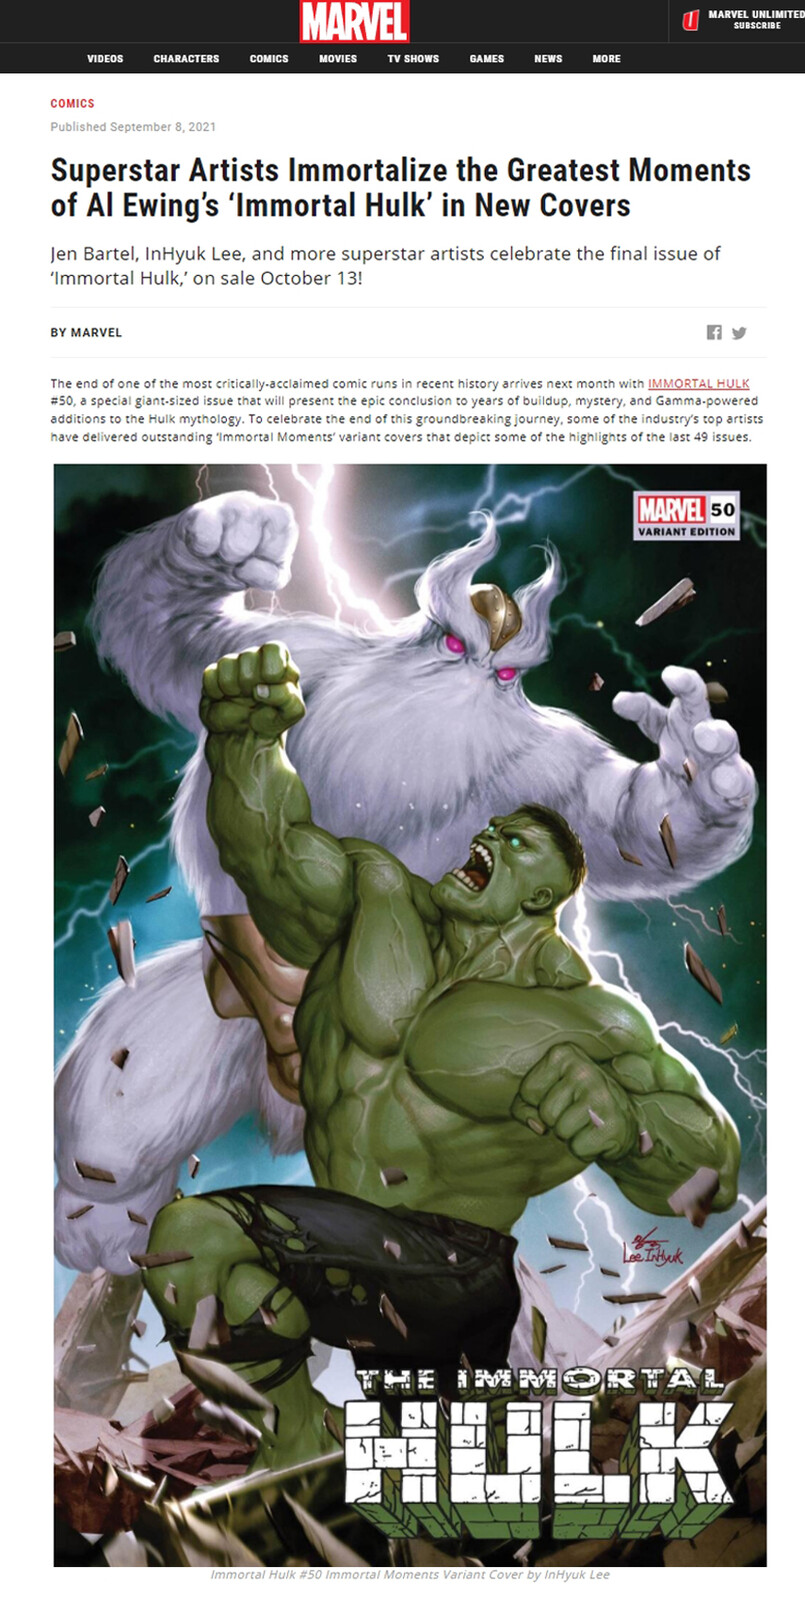 https://www.marvel.com/articles/comics/superstar-artists-immortalize-the-greatest-moments-of-al-ewing-s-immortal-hulk-in-new-covers 